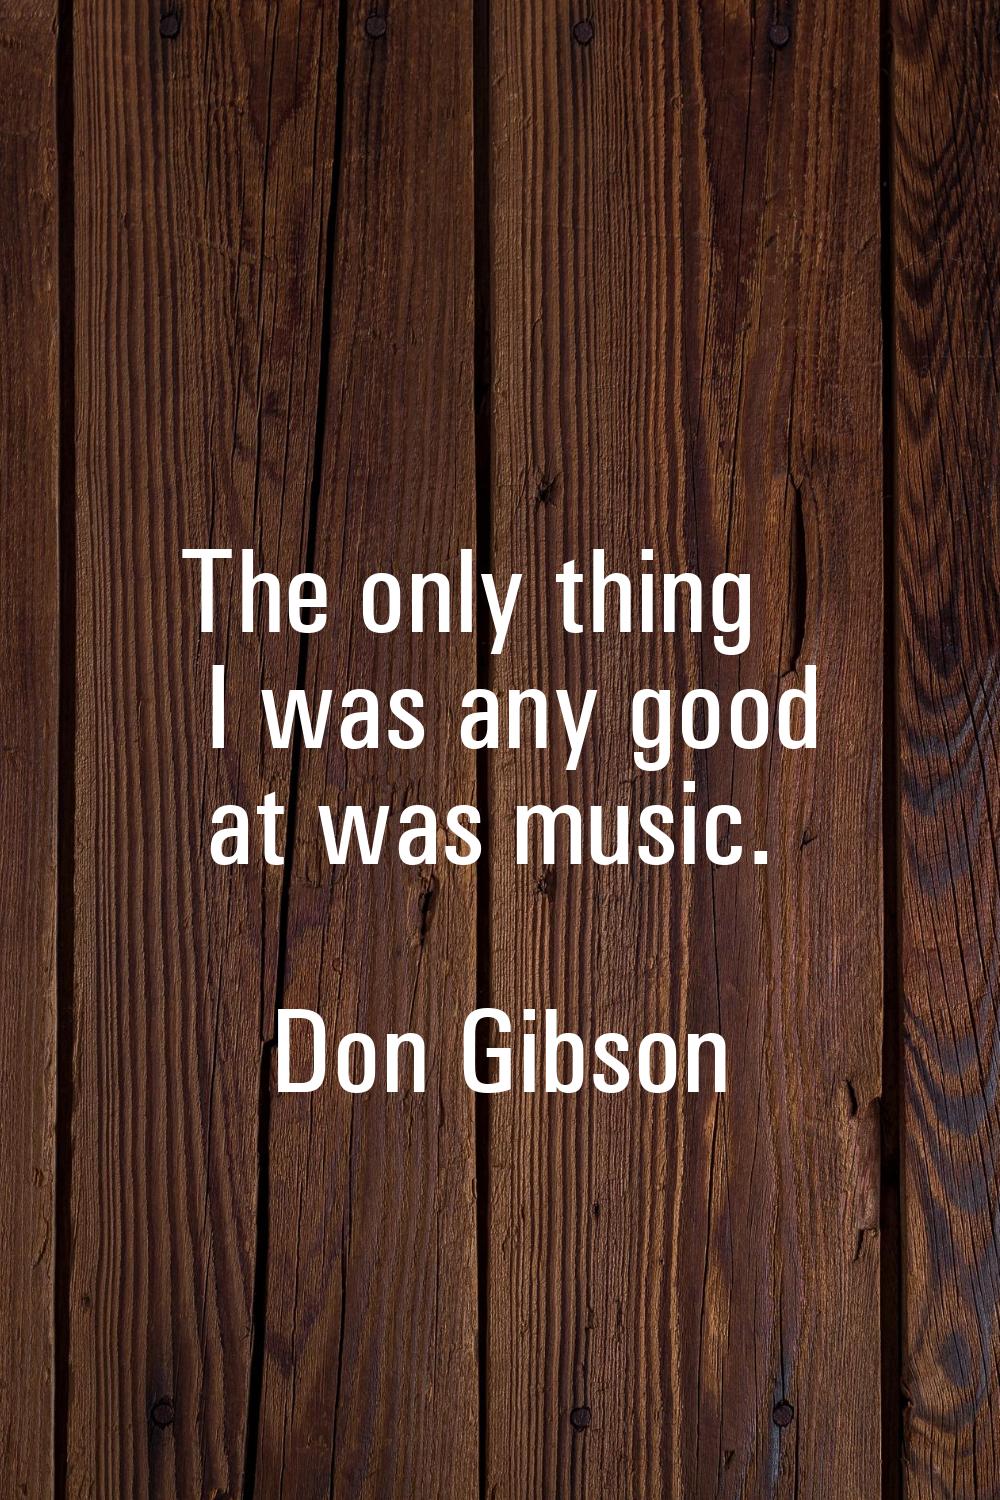 The only thing I was any good at was music.